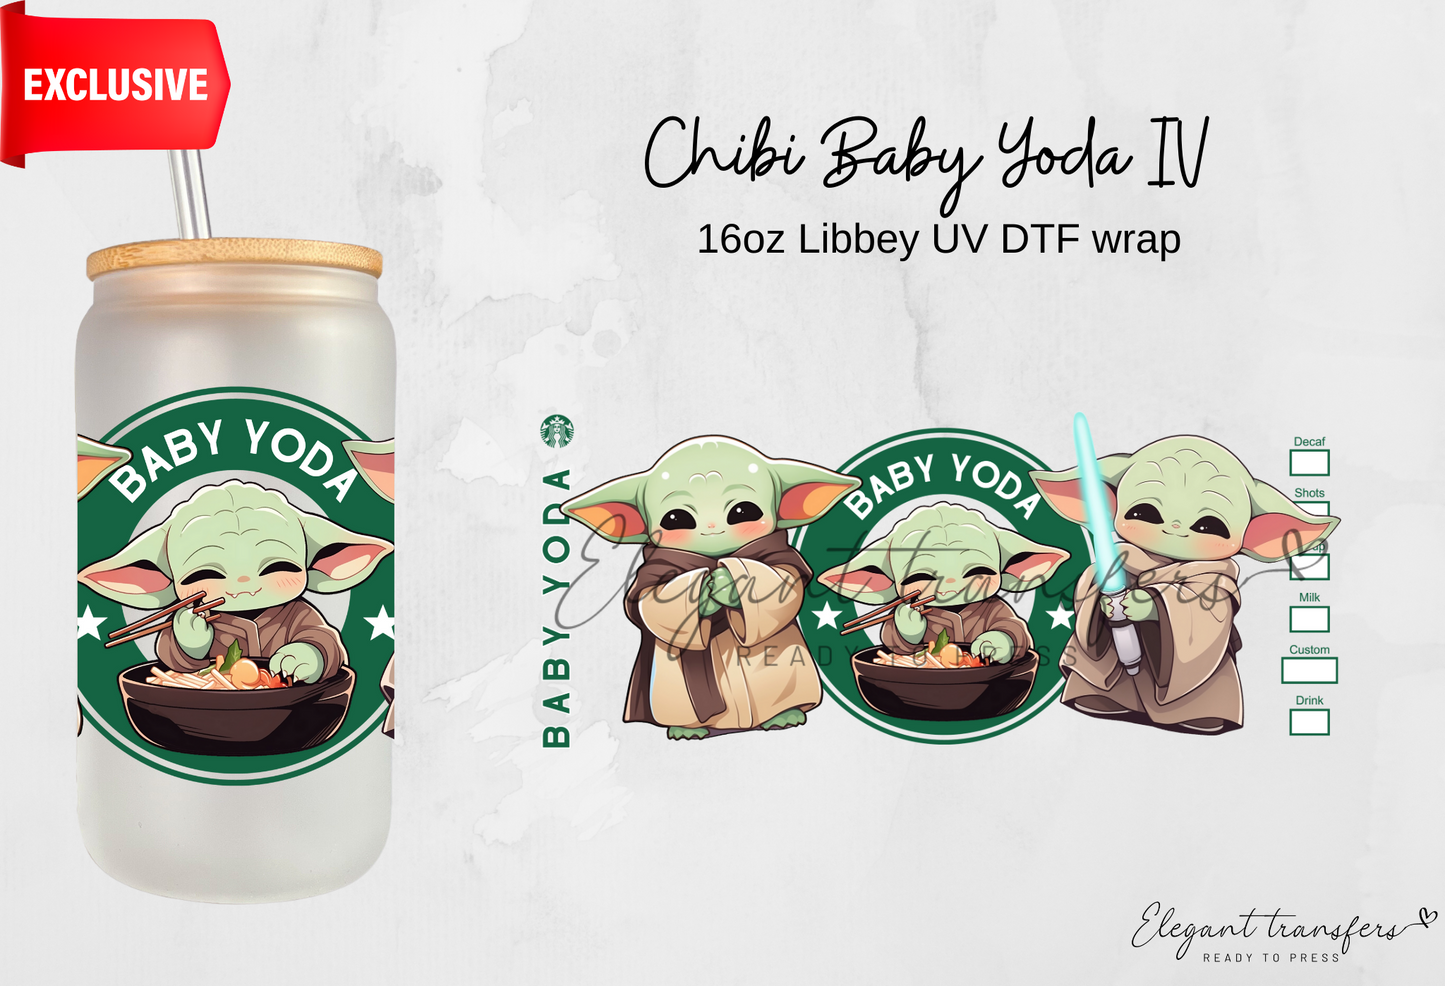 Chibi Baby Yoda IV wrap [Exclusive Uv Dtf - 16oz Libbey Glass Can] | Ready to Apply | Physical Product